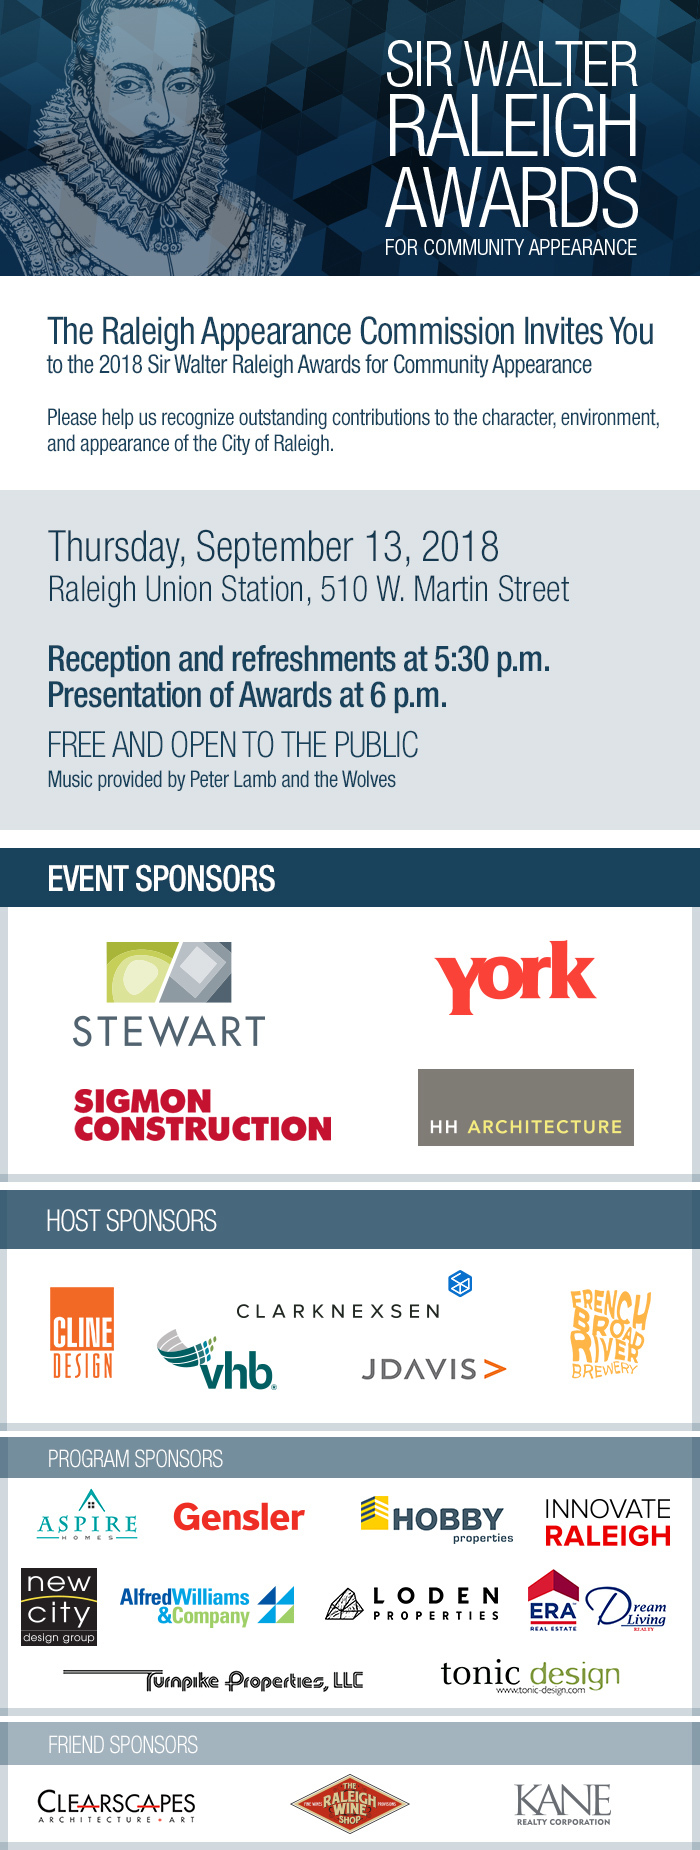 2018 Sir Walter Raleigh Awards ceremony will be held Thursday, Sept. 13, 2018 at Raleigh Union Station, 510 W. Martin Street, Raleigh, NC. Reception and refreshments at 5:30 p.m. Presentation of Awards at 6 p.m. Music provided by Peter Lamb and the Wolves. FREE AND OPEN TO THE PUBLIC. The Sir Walter Raleigh Awards for Community Appearance recognize outstanding new contributions to the character, environment and appearance of the City of Raleigh. Since 1983, the Raleigh City Council has presented more than 200 Sir Walter Raleigh Awards to developers, designers, building owners, community groups, civic clubs, churches, and citizens. raleighnc.gov